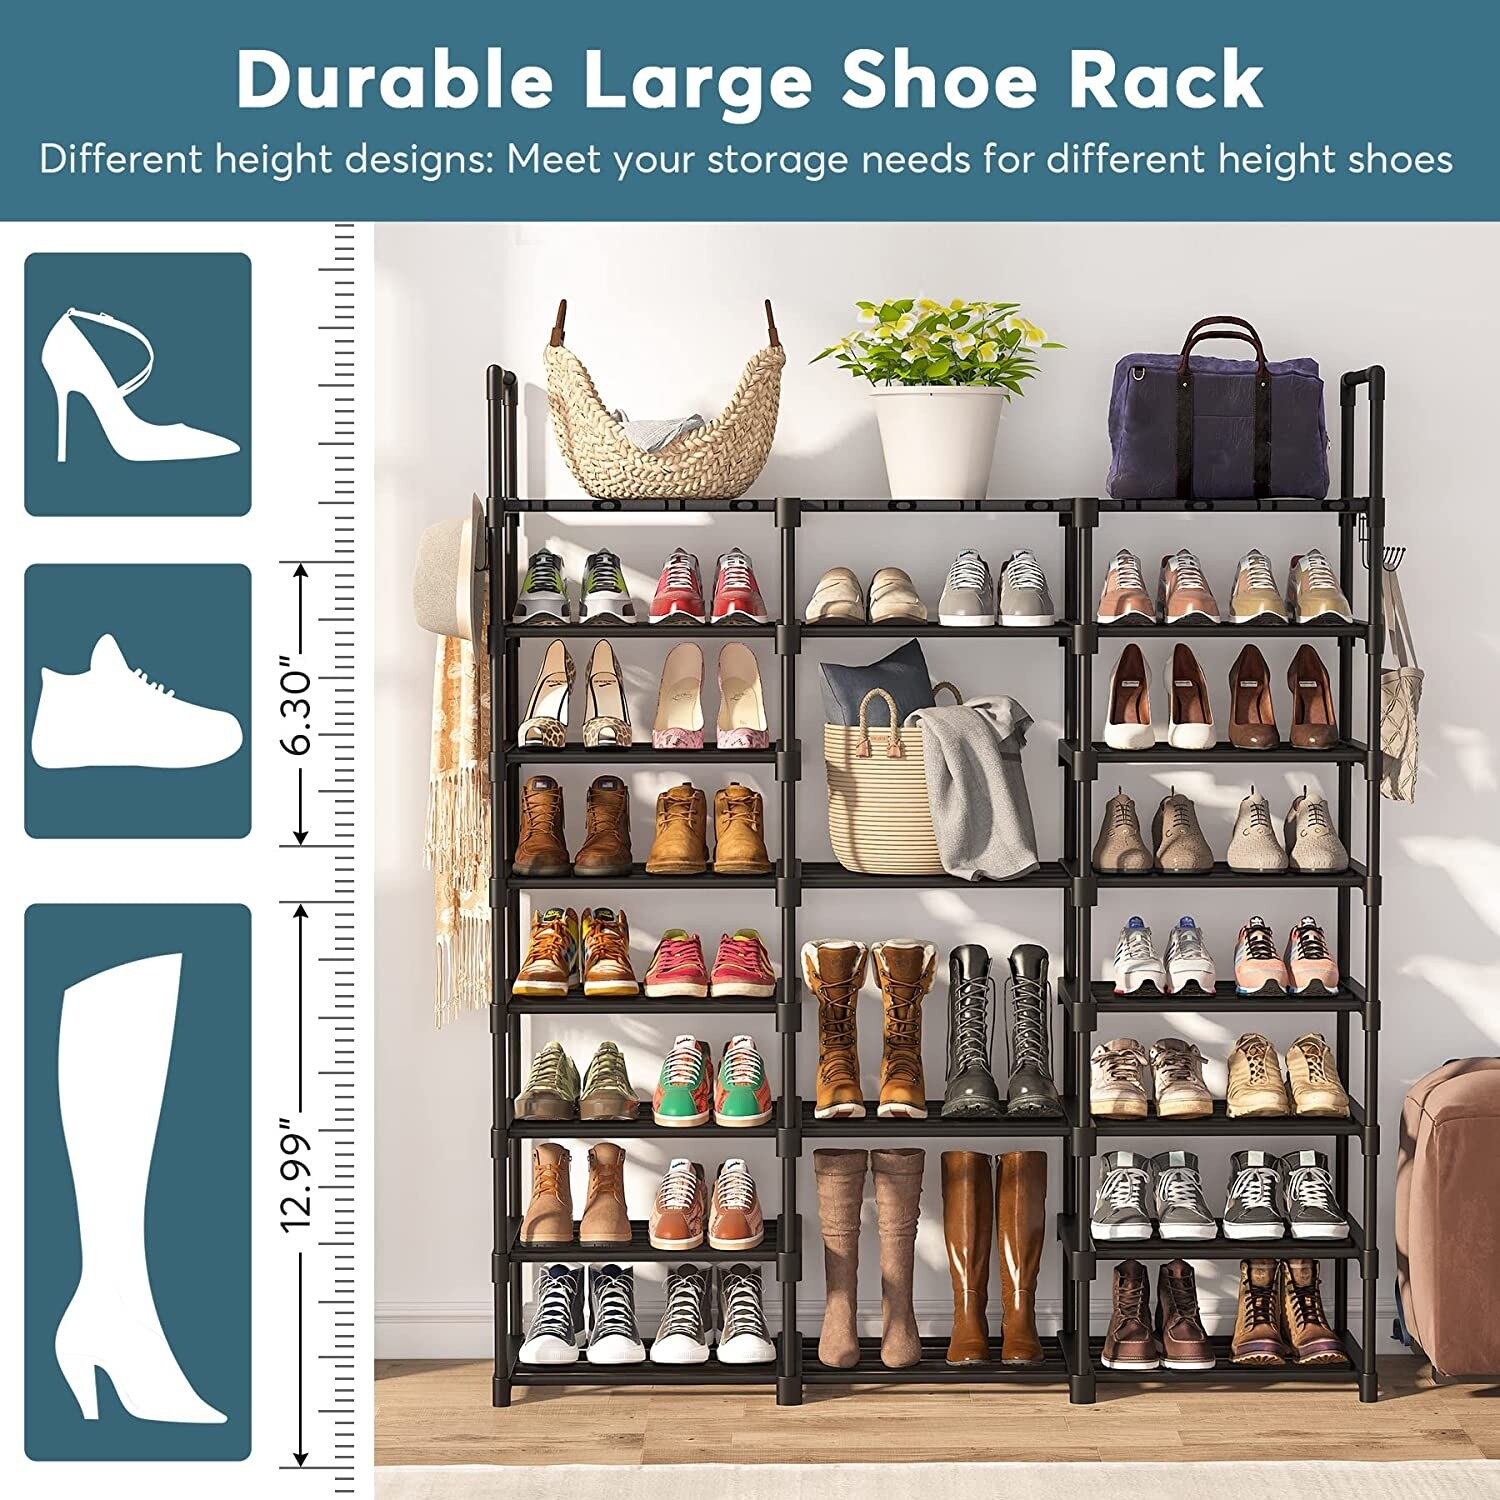 https://ak1.ostkcdn.com/images/products/is/images/direct/d61322fc96d266d2c7b55685c2d78532df751204/Large-Shoe-Rack-Organizer---Tiered-Storage-Shoe-Stand-Tower-for-Sneakers%2C-Heels%2C-Flats%2C-and-Accessories-by-Lee-Furniture.jpg